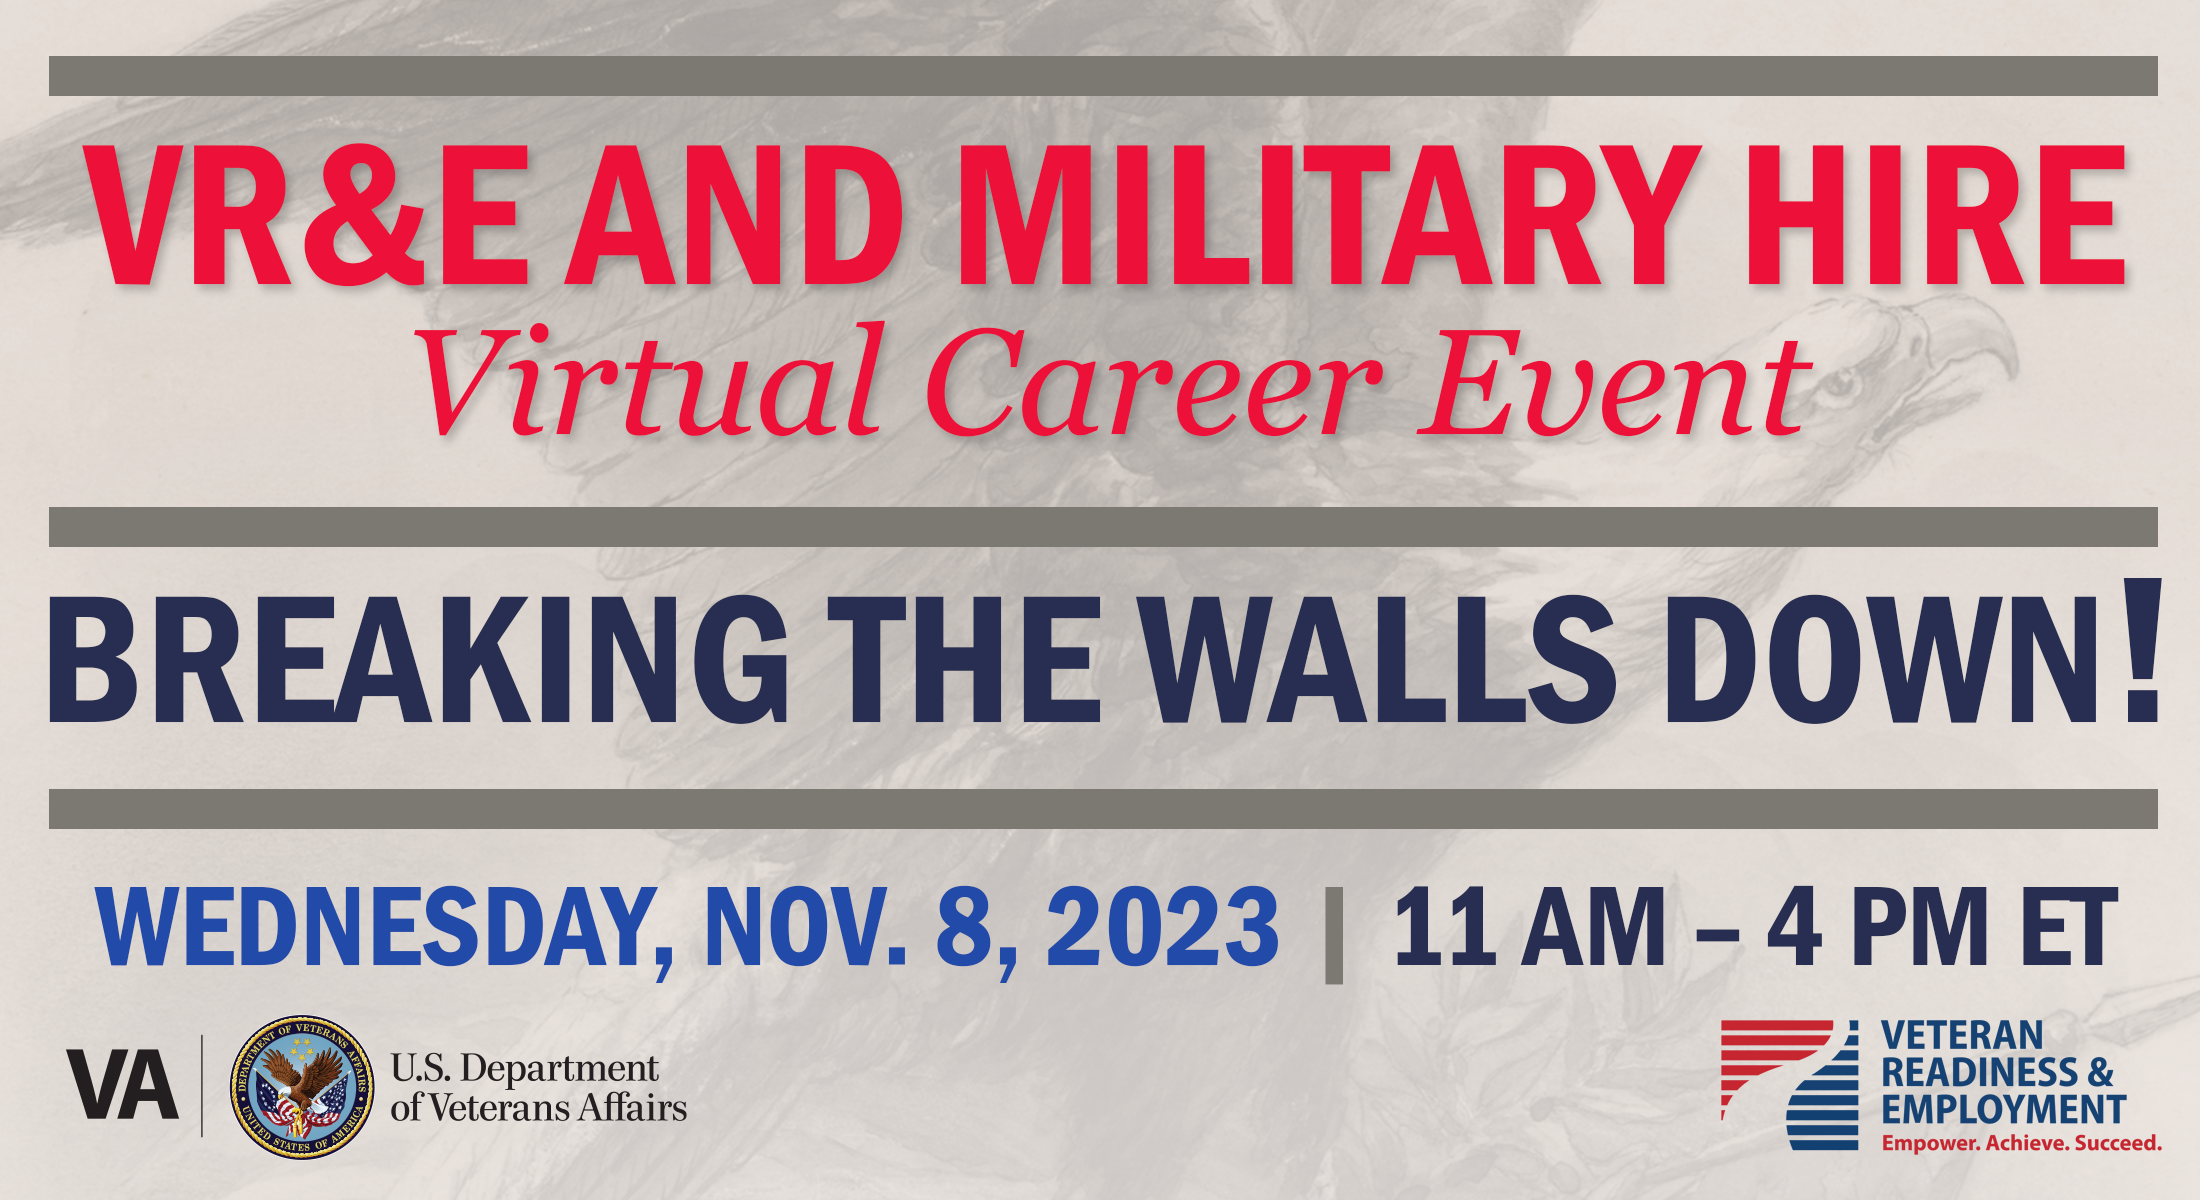 VR&E and Military Hire Career Event